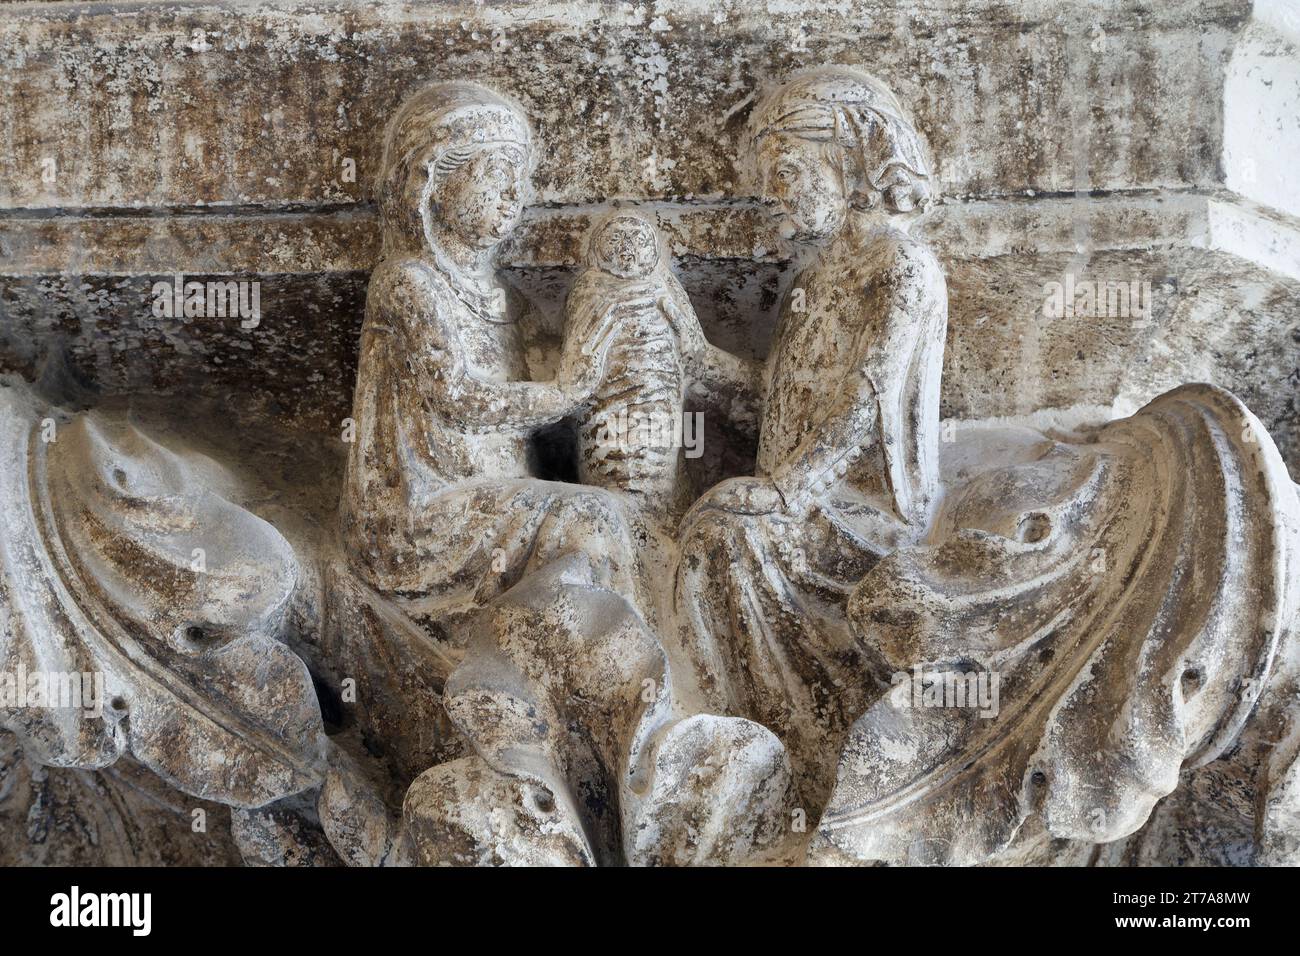 The born of the child - Love, Marriage, Fathering and Death - Column capital of Palazzo Ducale (Doge's Palace, St Mark's Square) - Venice Stock Photo